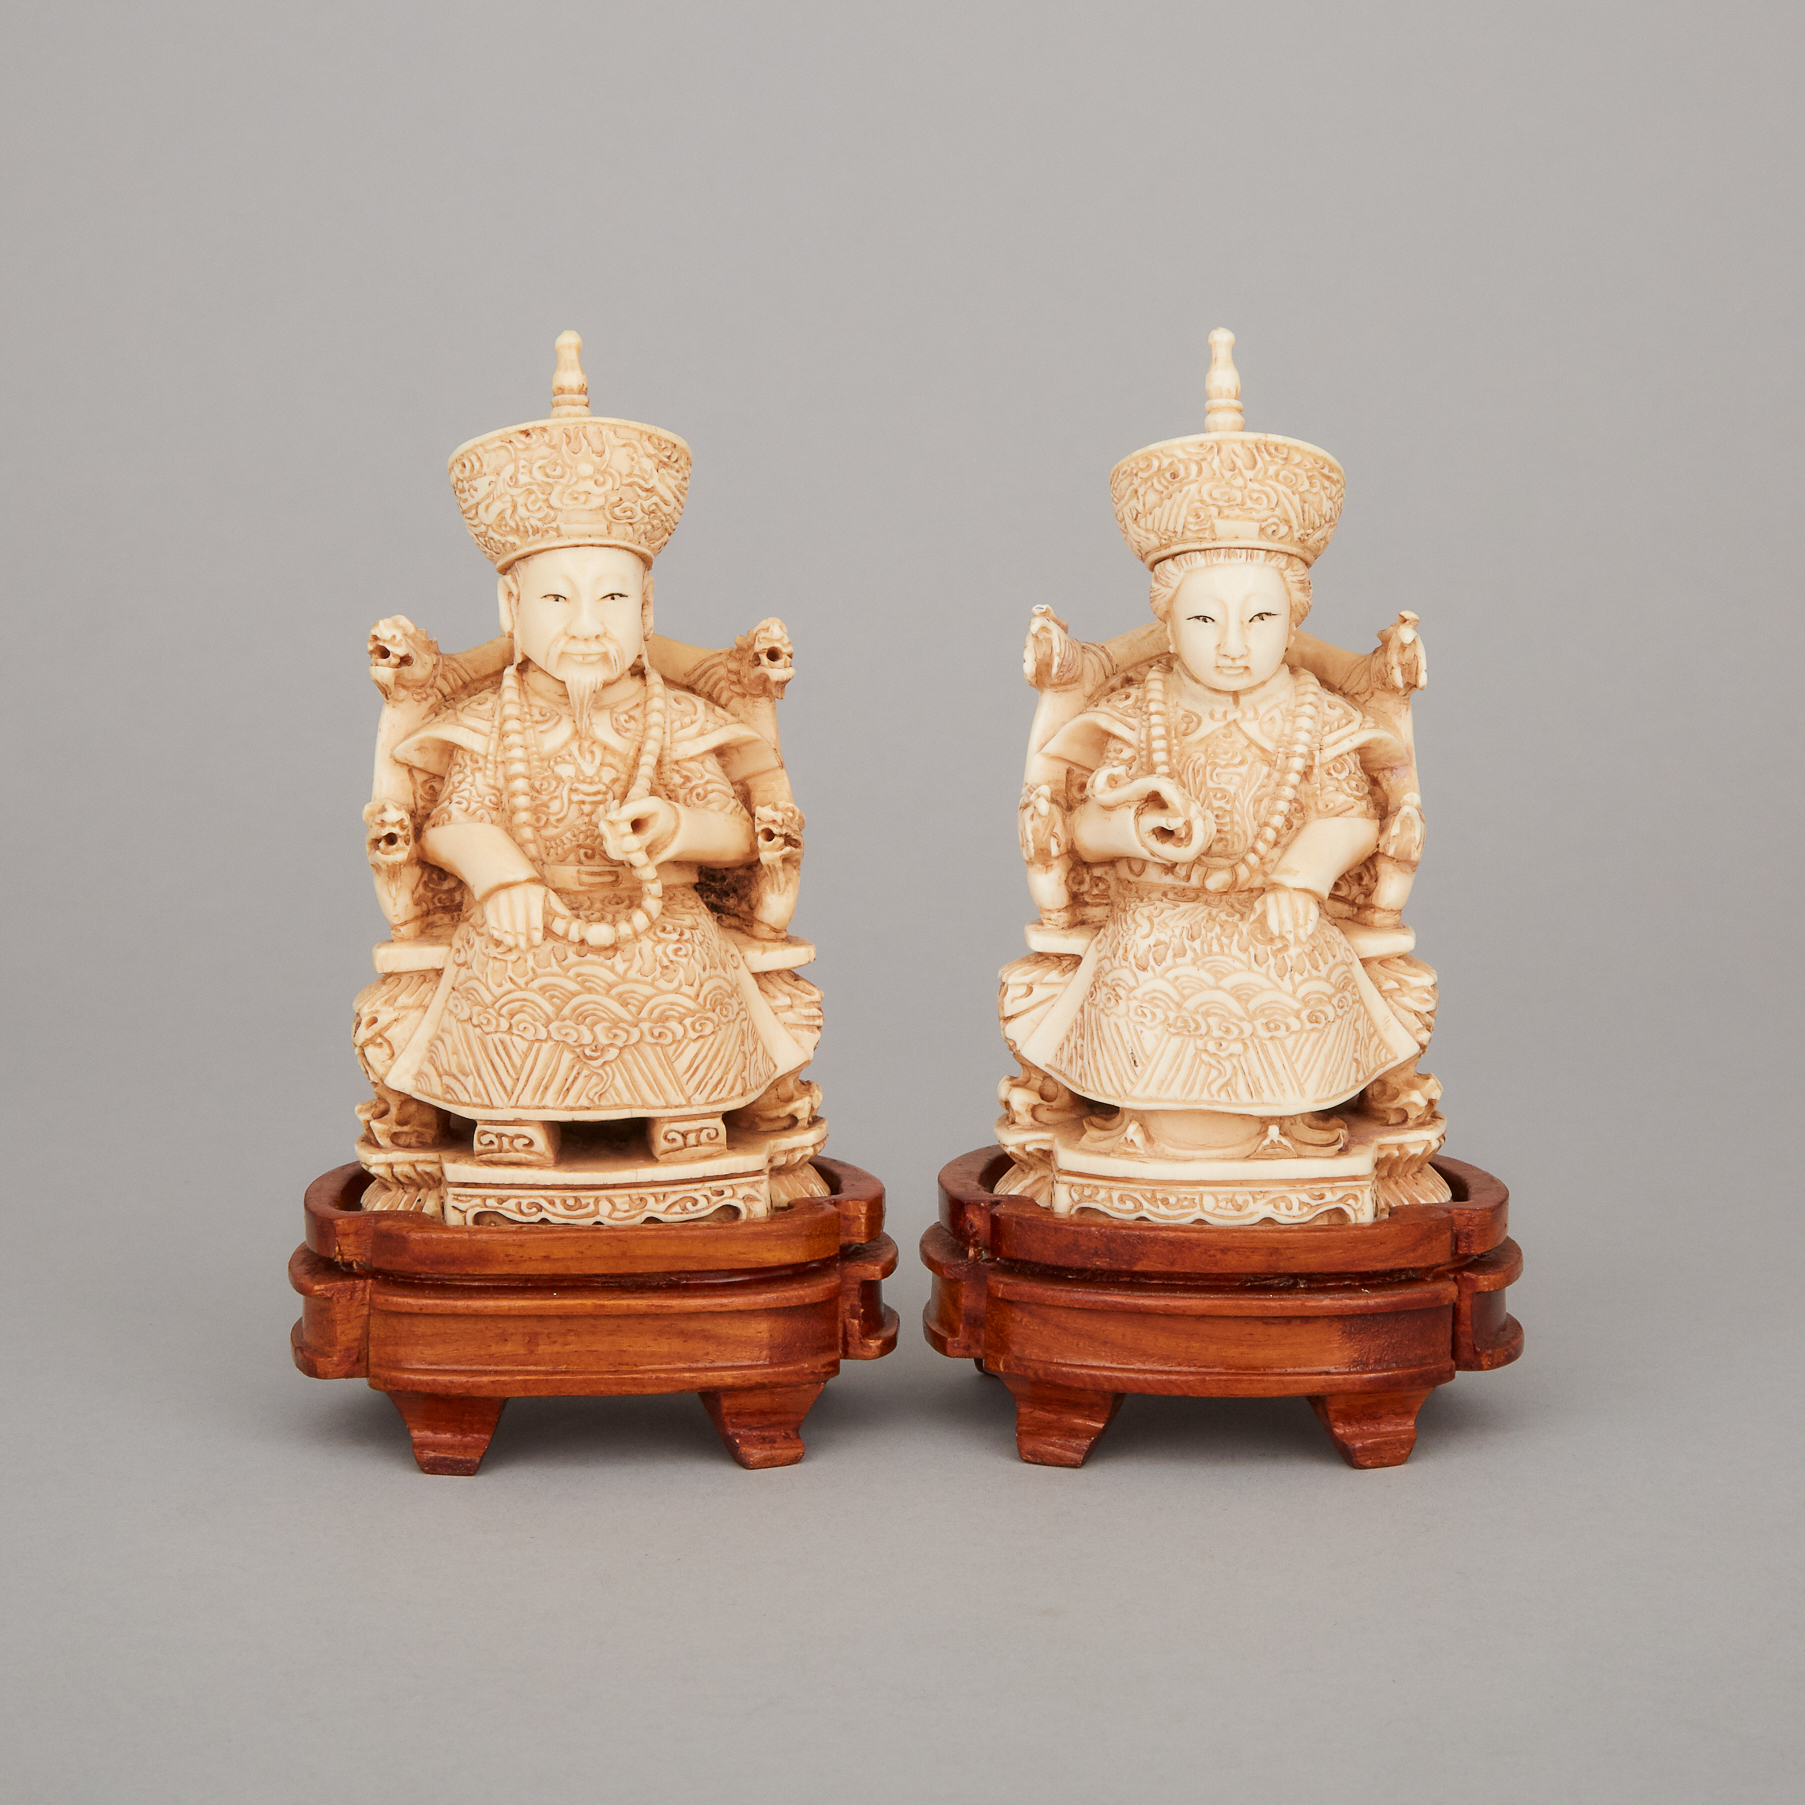 An Ivory Carved King and Queen Pair